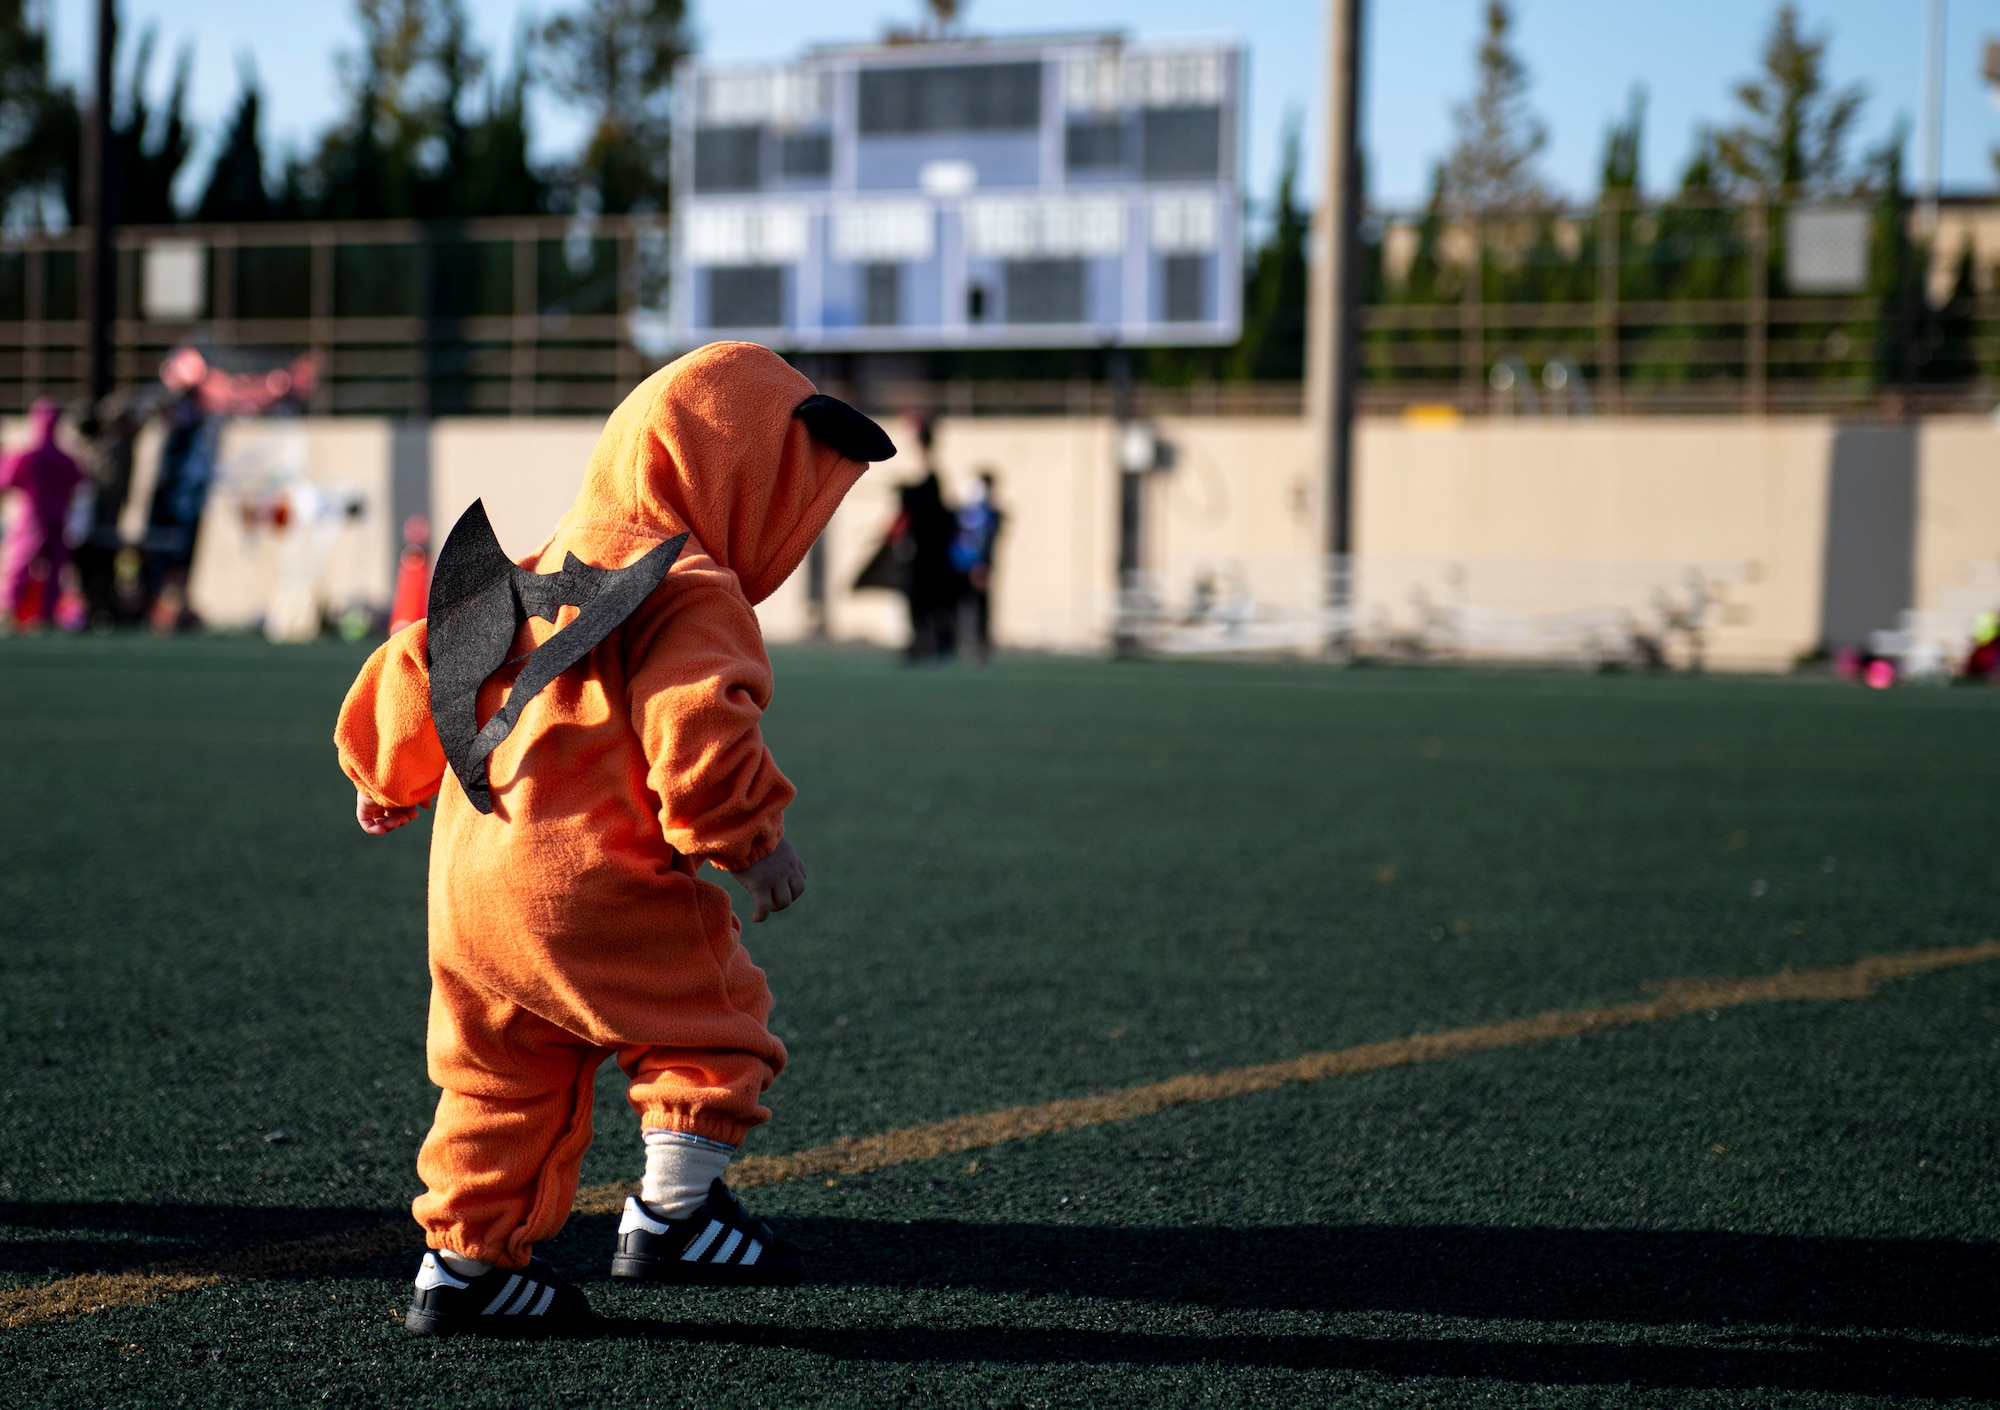 A Republic of Korea child runs through Kunsan’s soccer field during Kunsan’s Annual Halloween Trick-or-Treat at Kunsan Air Base, Republic of Korea, October, 28, 2021. The 8th Civil Engineer Squadron hosted this years event which was open to all U.S. Military and South Korean Nationals with base access. (U.S. Air Force photo by Staff Sgt. Jesenia Landaverde)